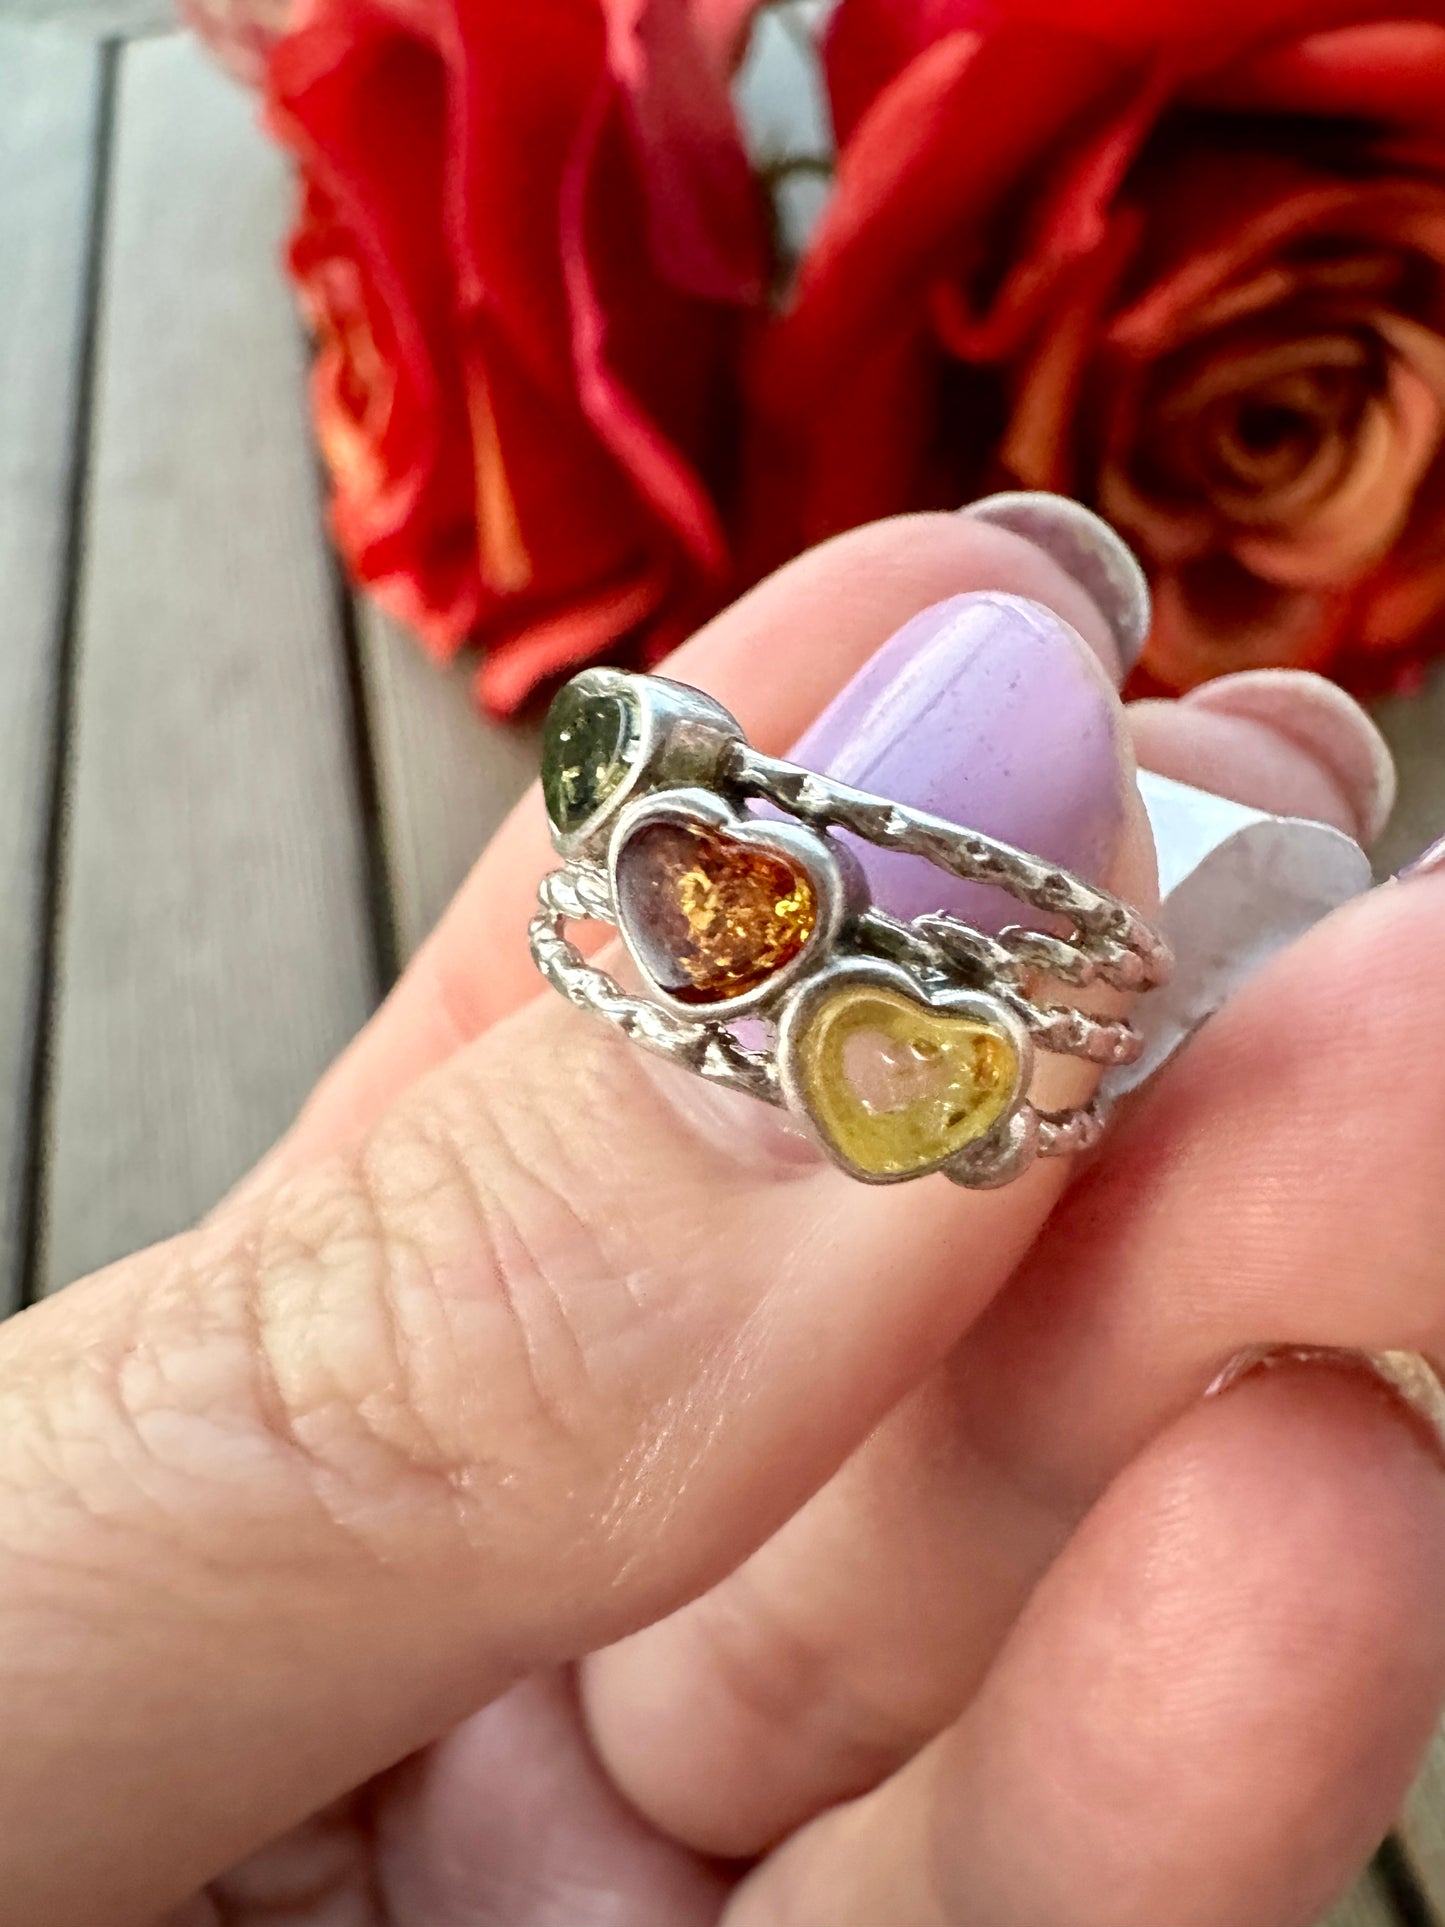 Amber Sterling Silver Ring Size 6.25 - Radiant Handcrafted Jewelry for Warmth, Healing, and Elegance